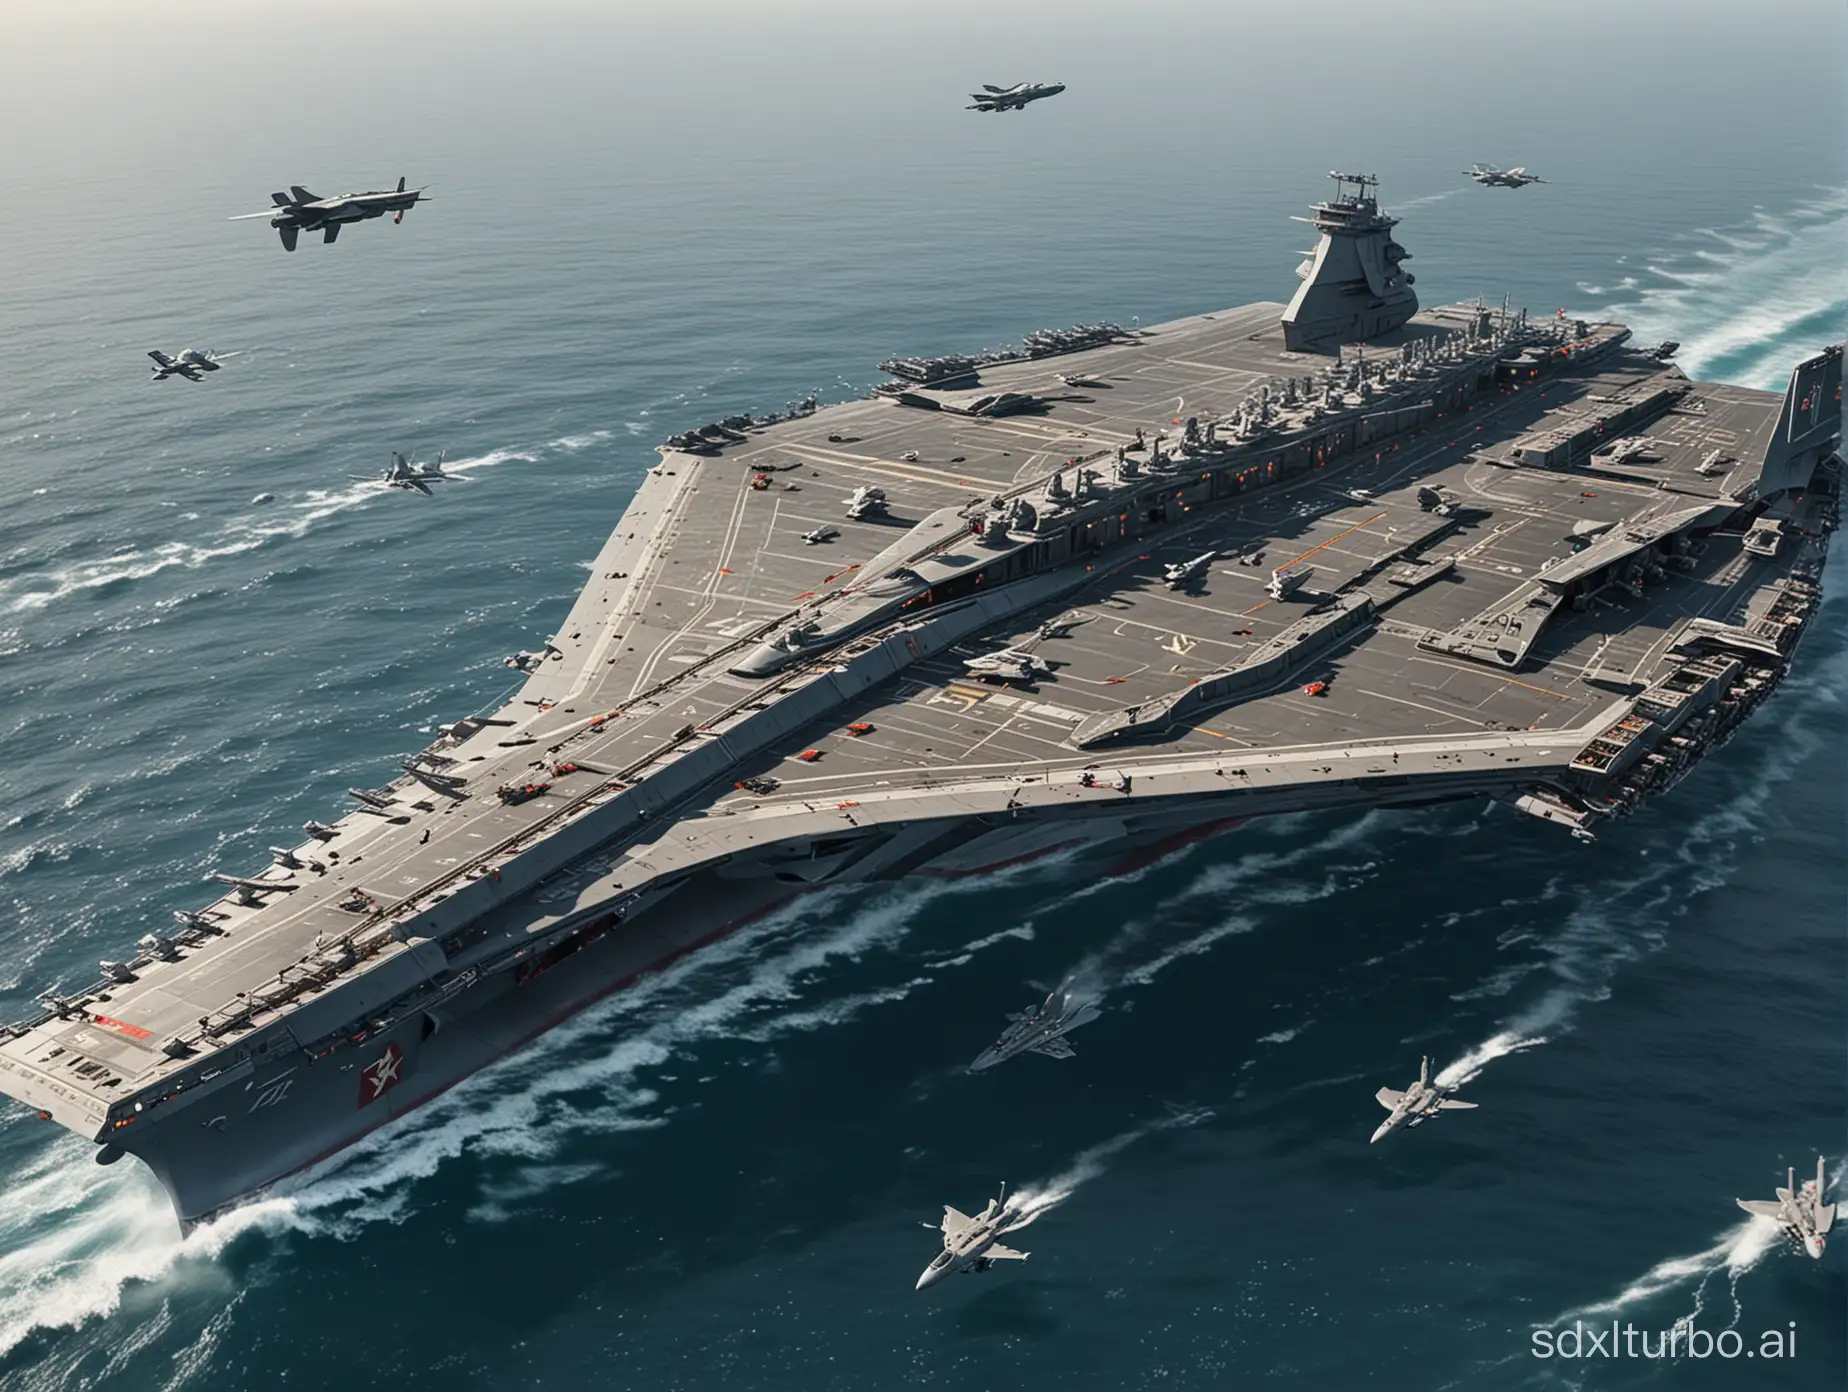 Design an aircraft carrier that can fly in the air, equipped with futuristic attack drones, combining elements of ancient Chinese architecture and modern science fiction.